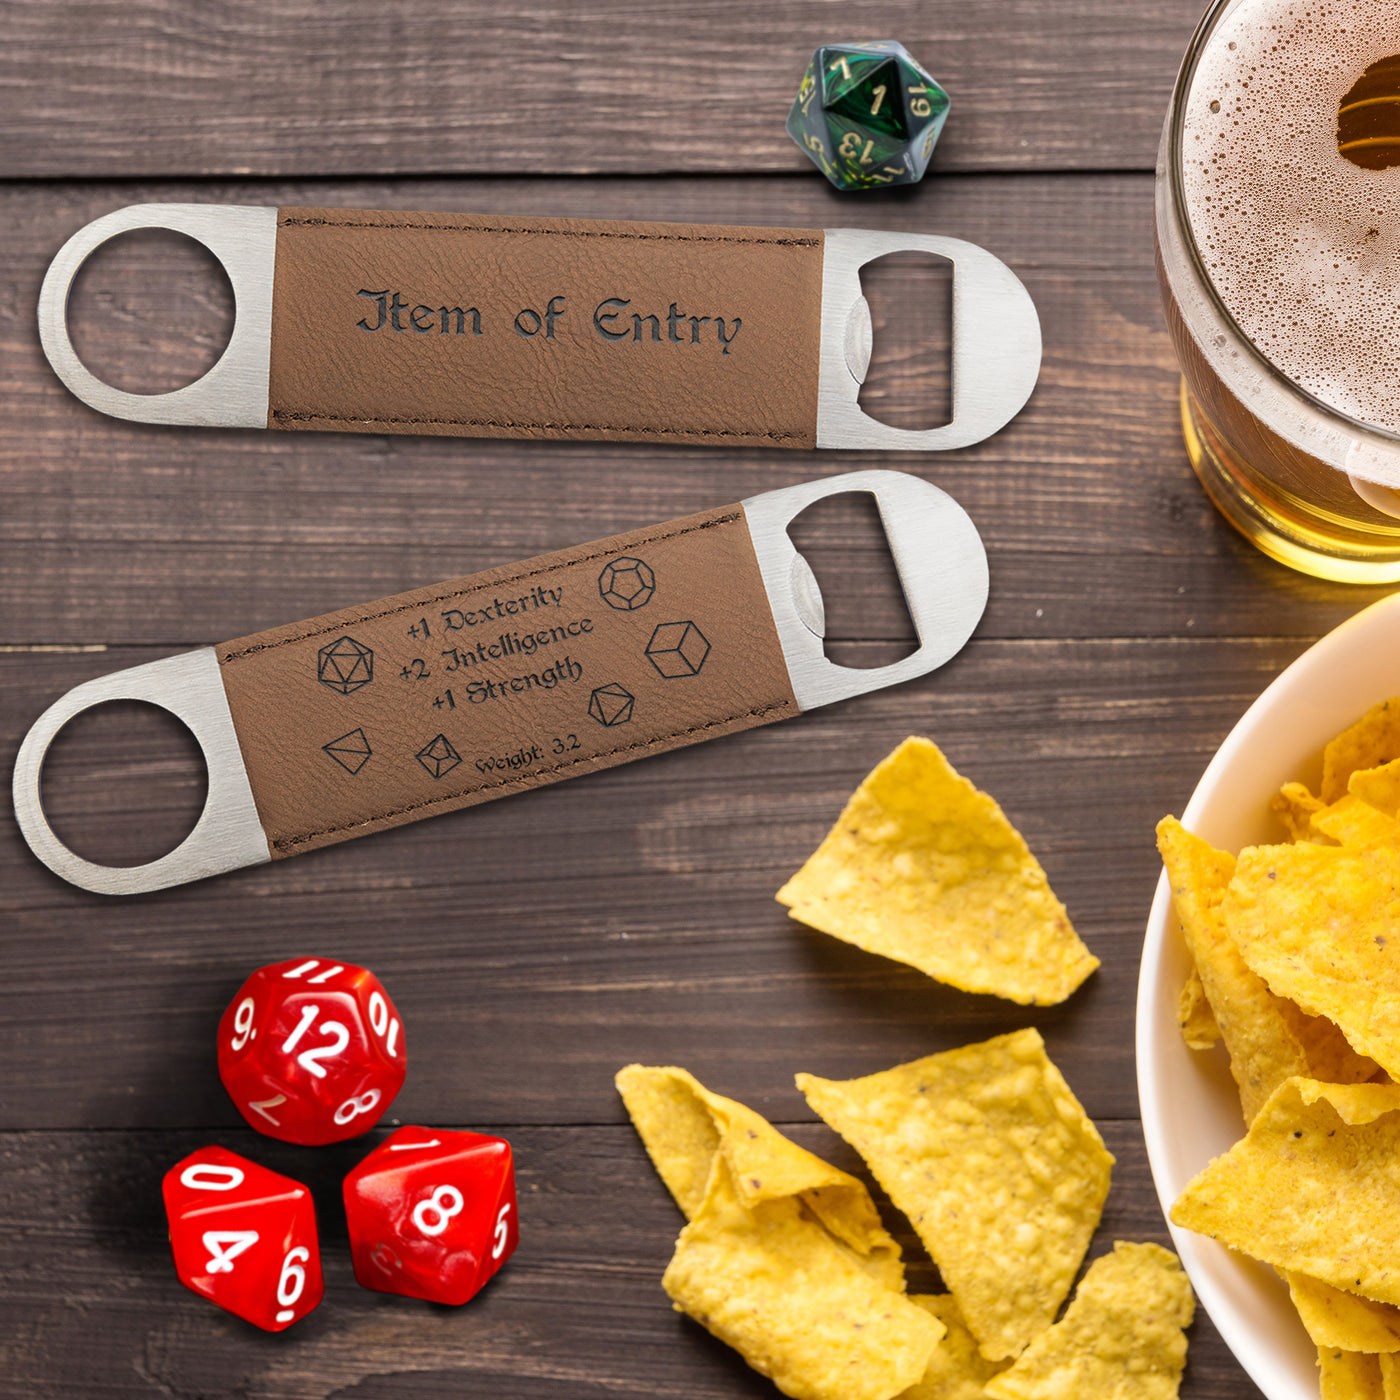 Dungeons and Dragons Item of Entry Bottle Opener | DnD Gifts Men | DnD Accessories | Dungeon Master Gifts | DnD Stuff | D&D Gifts